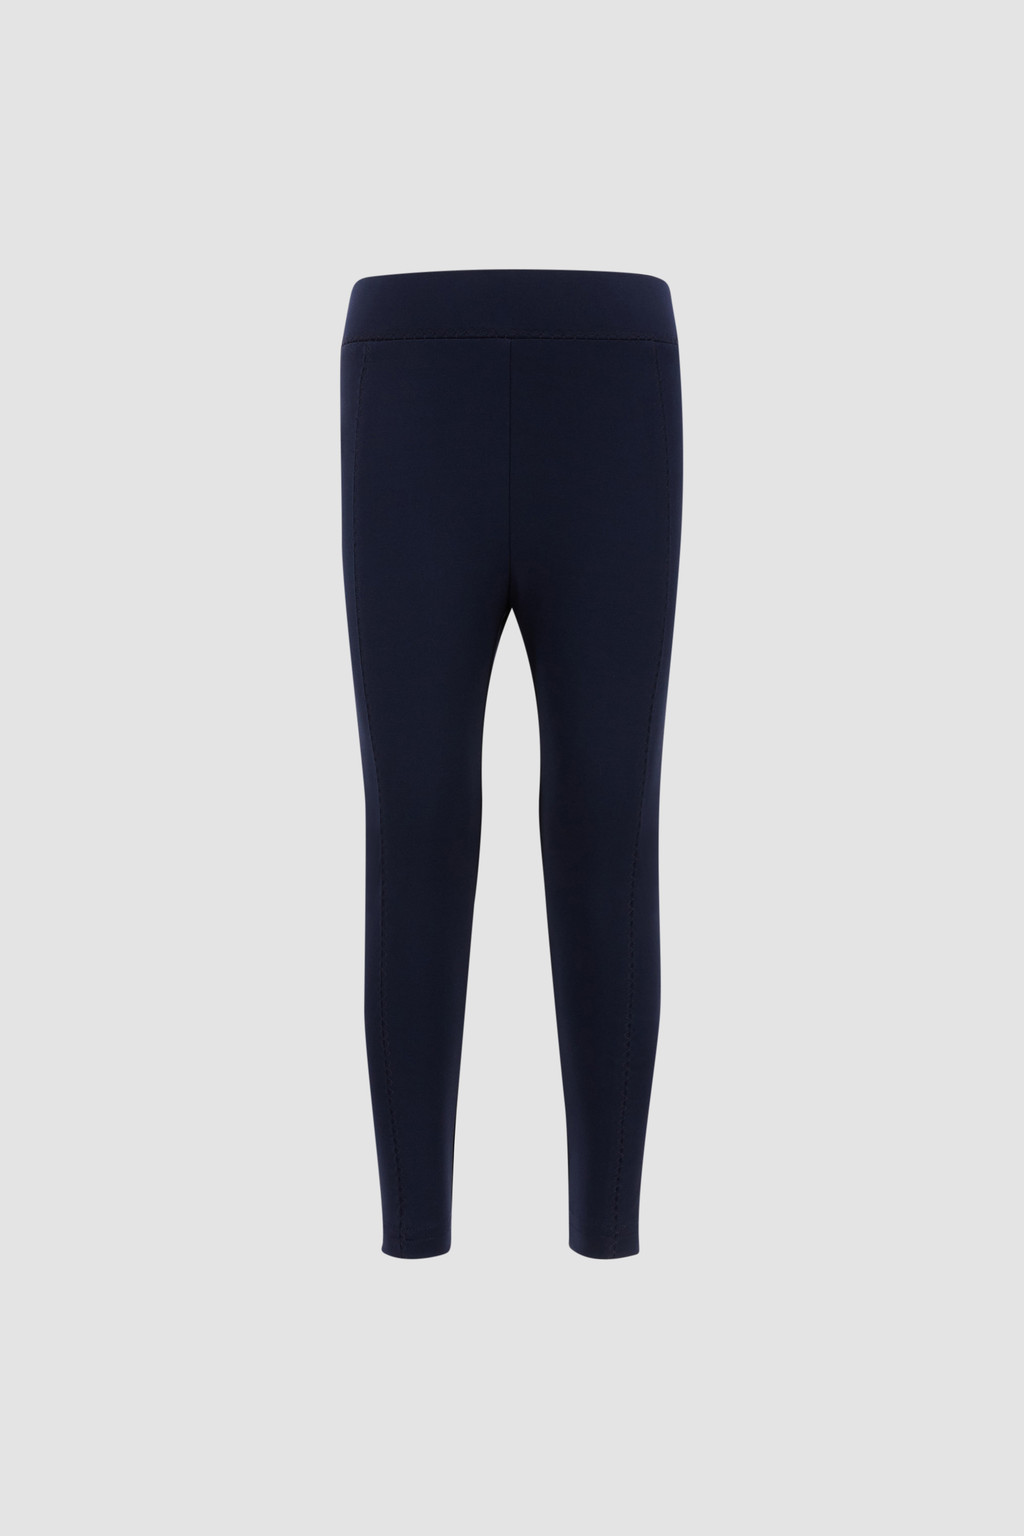 Buy COLOURFUL DESIRE Ankle Length Leggings for Girls Navy Blue Color  (Medium) at Amazon.in